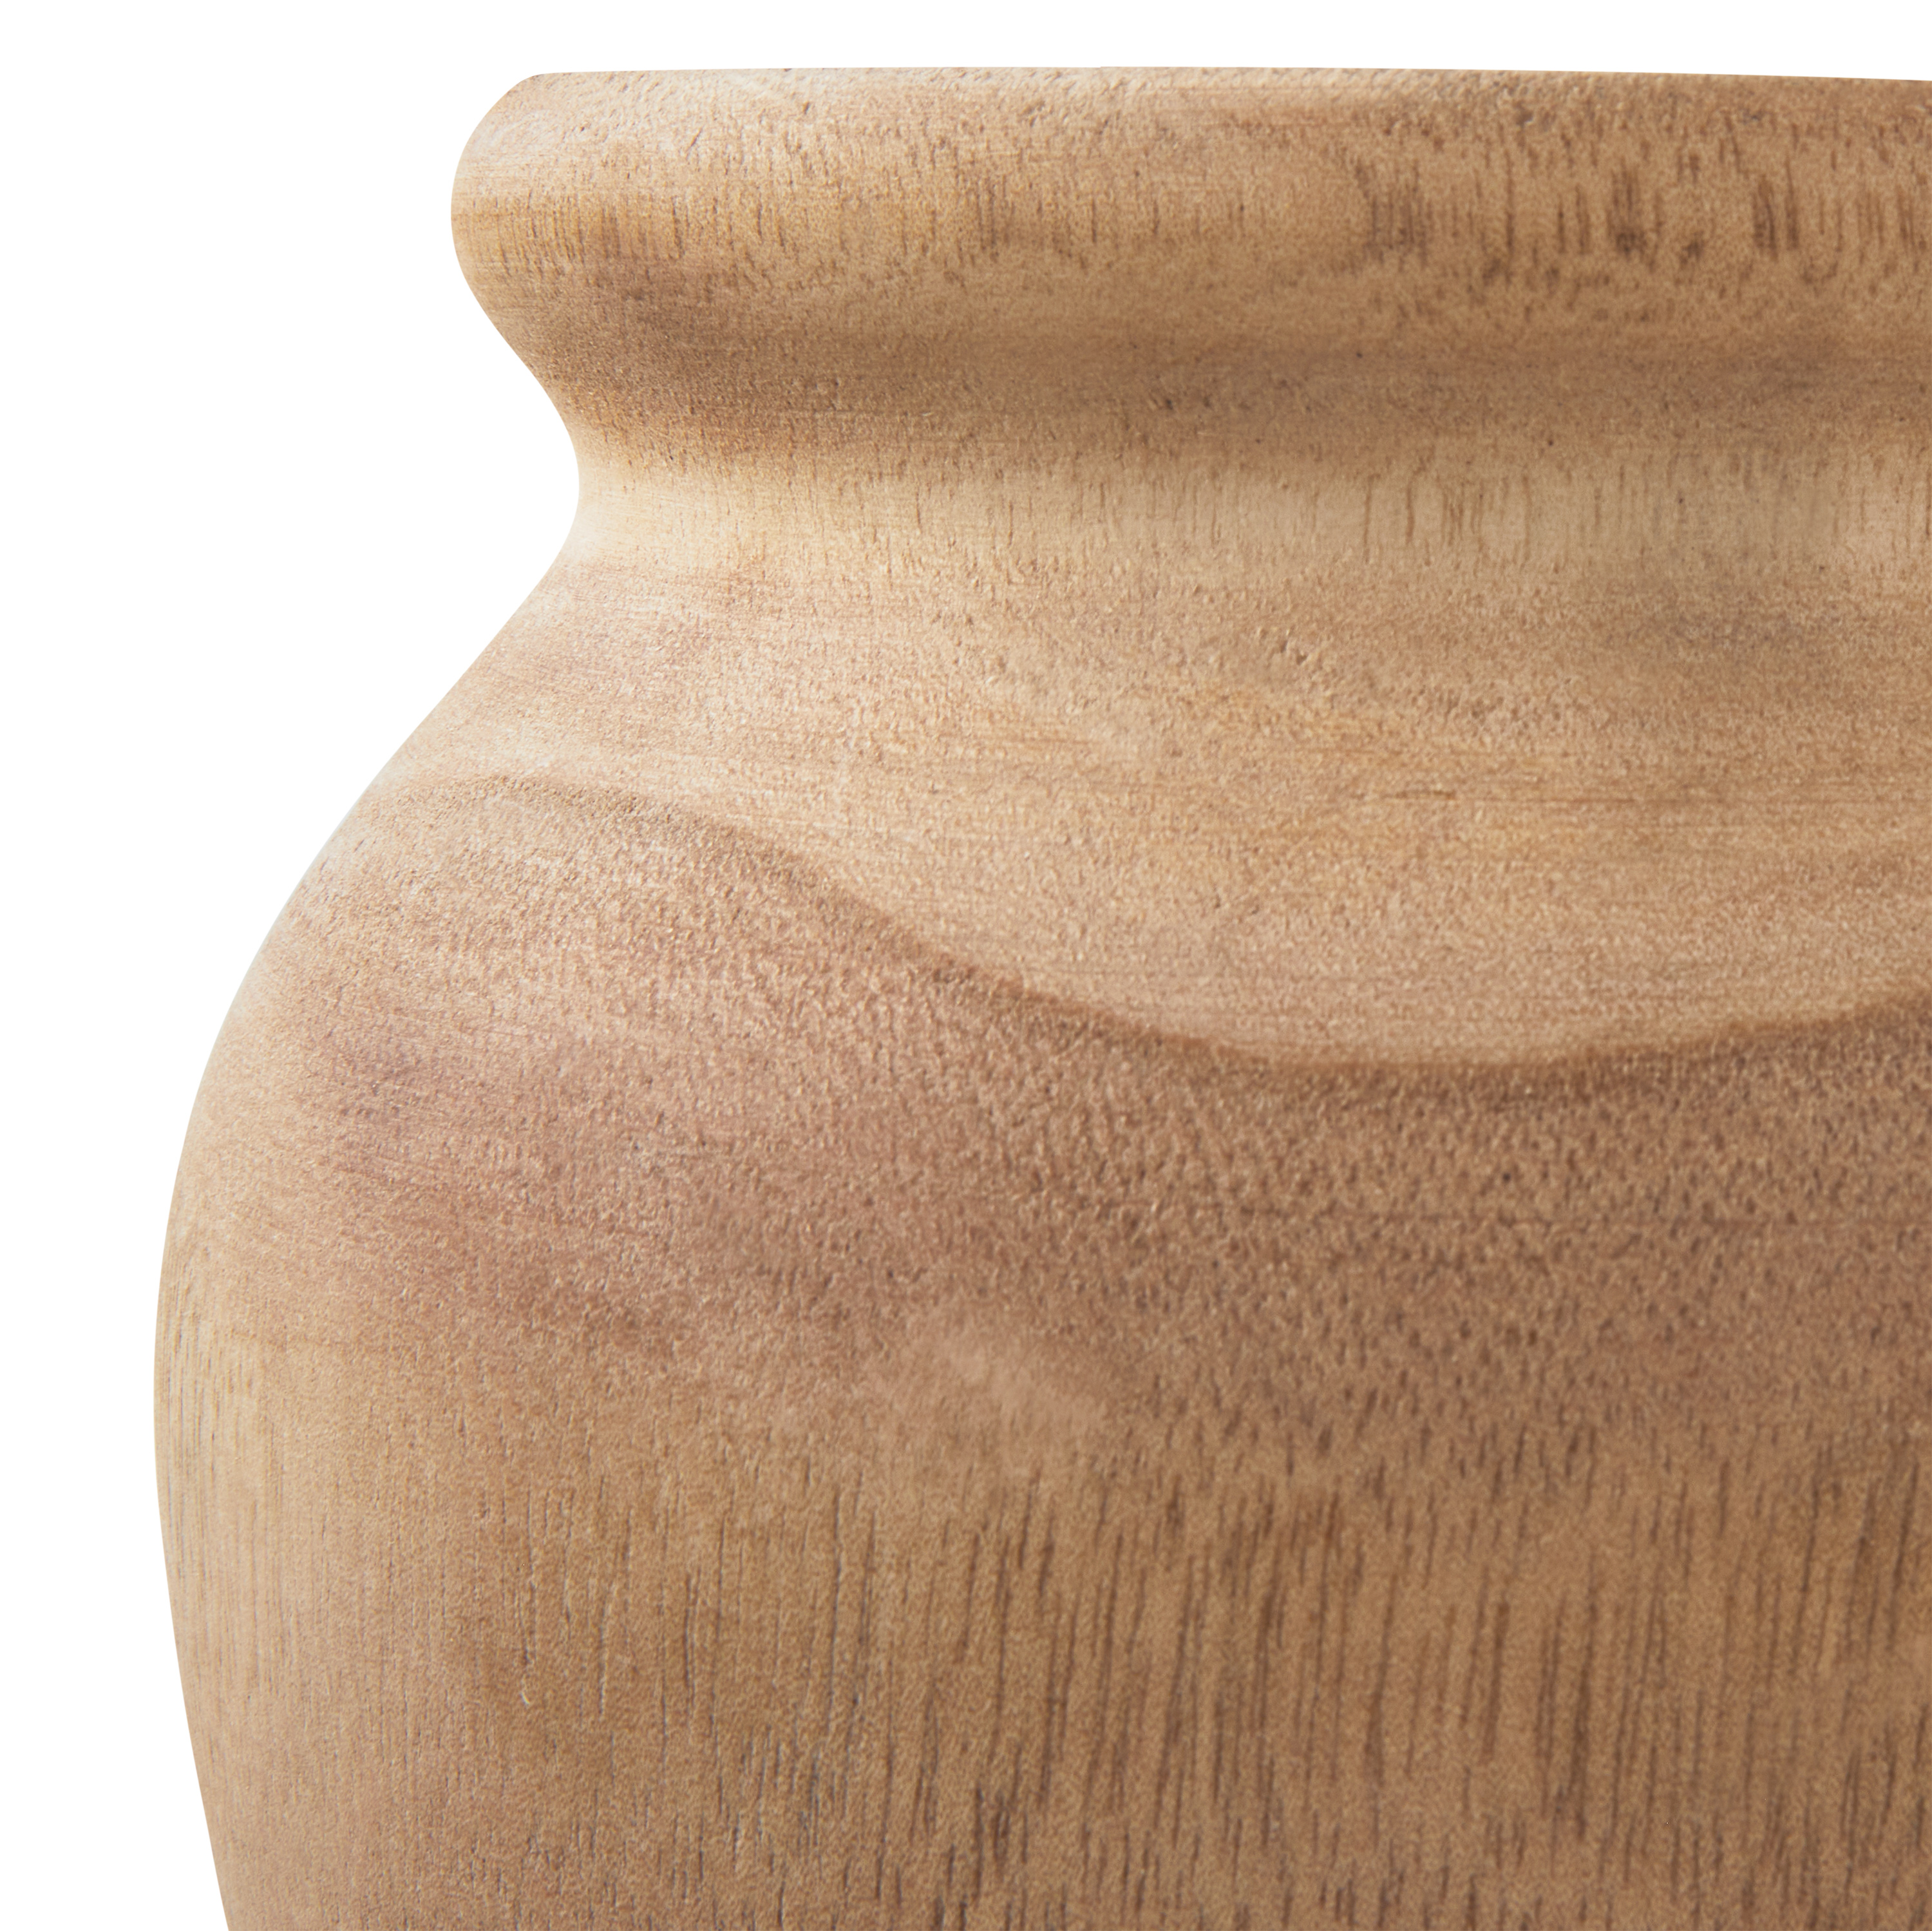 Better Homes & Gardens 7" Natural Wood Vase by Dave & Jenny Marrs - image 4 of 5